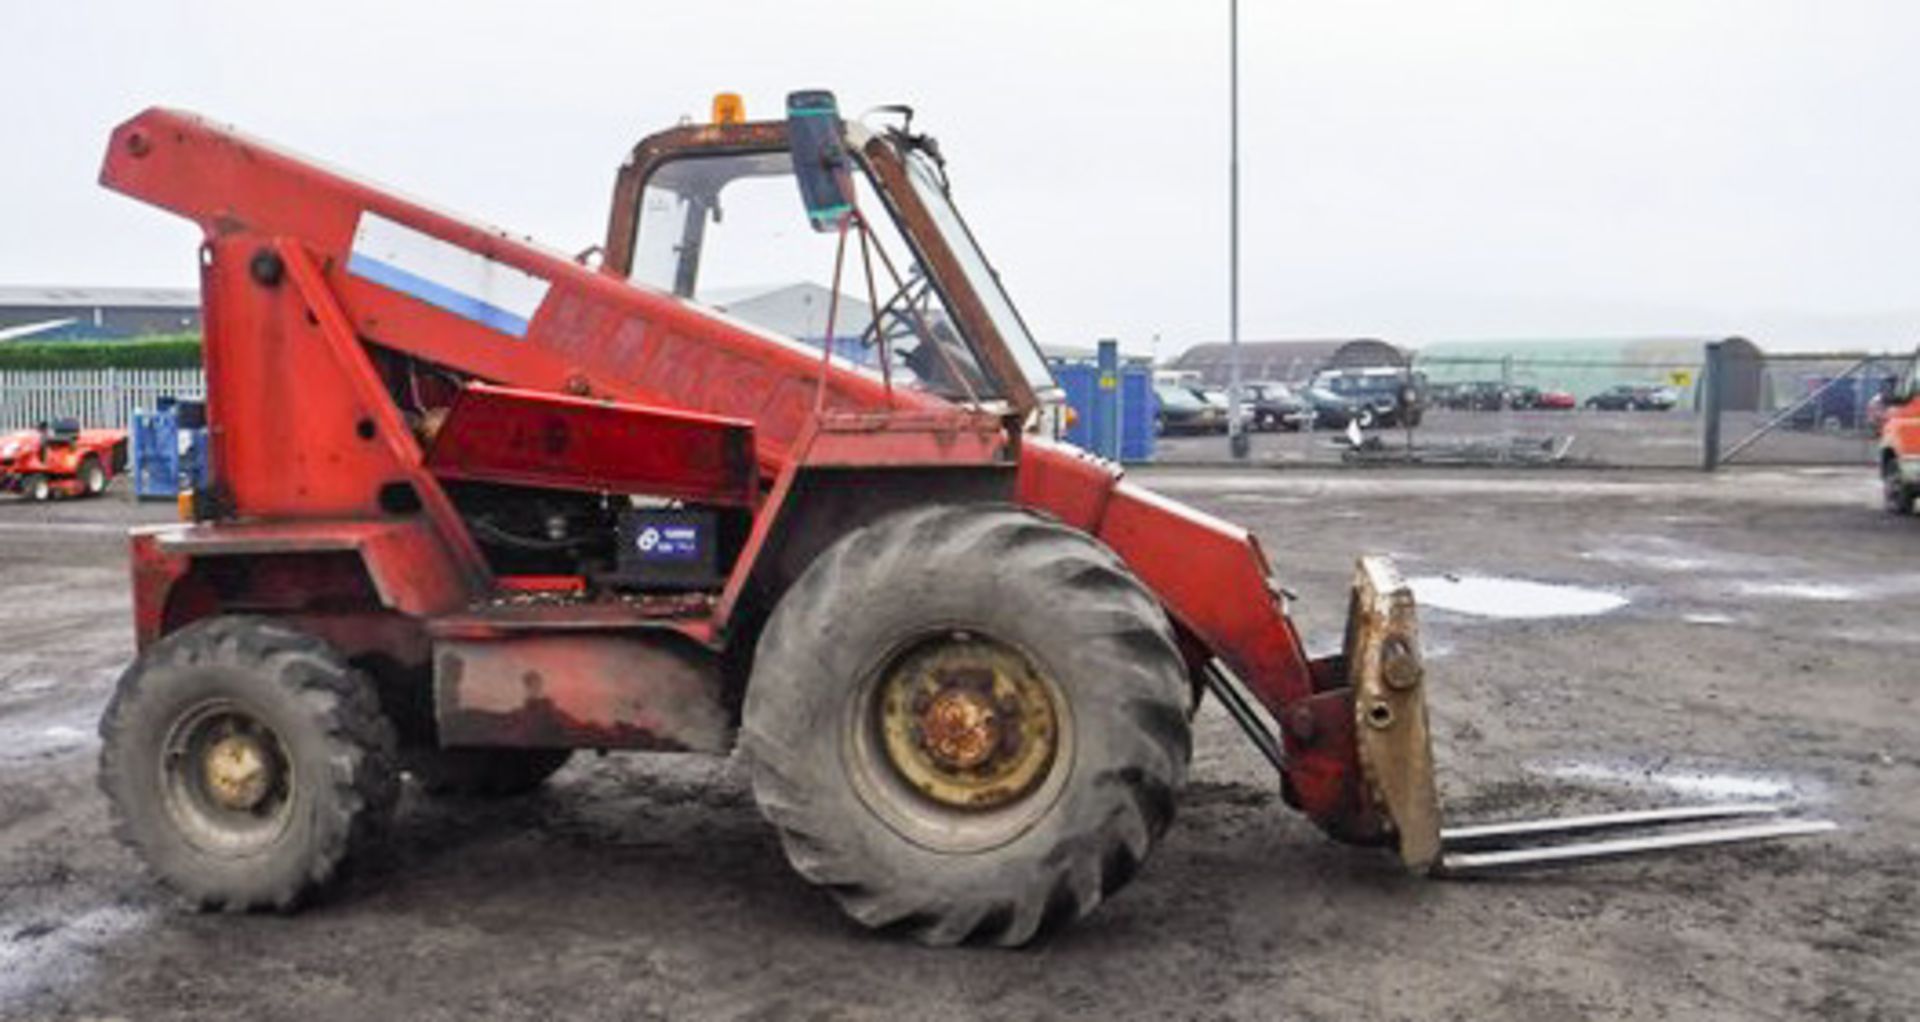 1989 MANITOU TURBO, MODEL - MT425CPT, SERIES 2, CHASSIS 185836, 5693HRS (NOT VERIFIED) ** 10% BUYERS - Image 10 of 15